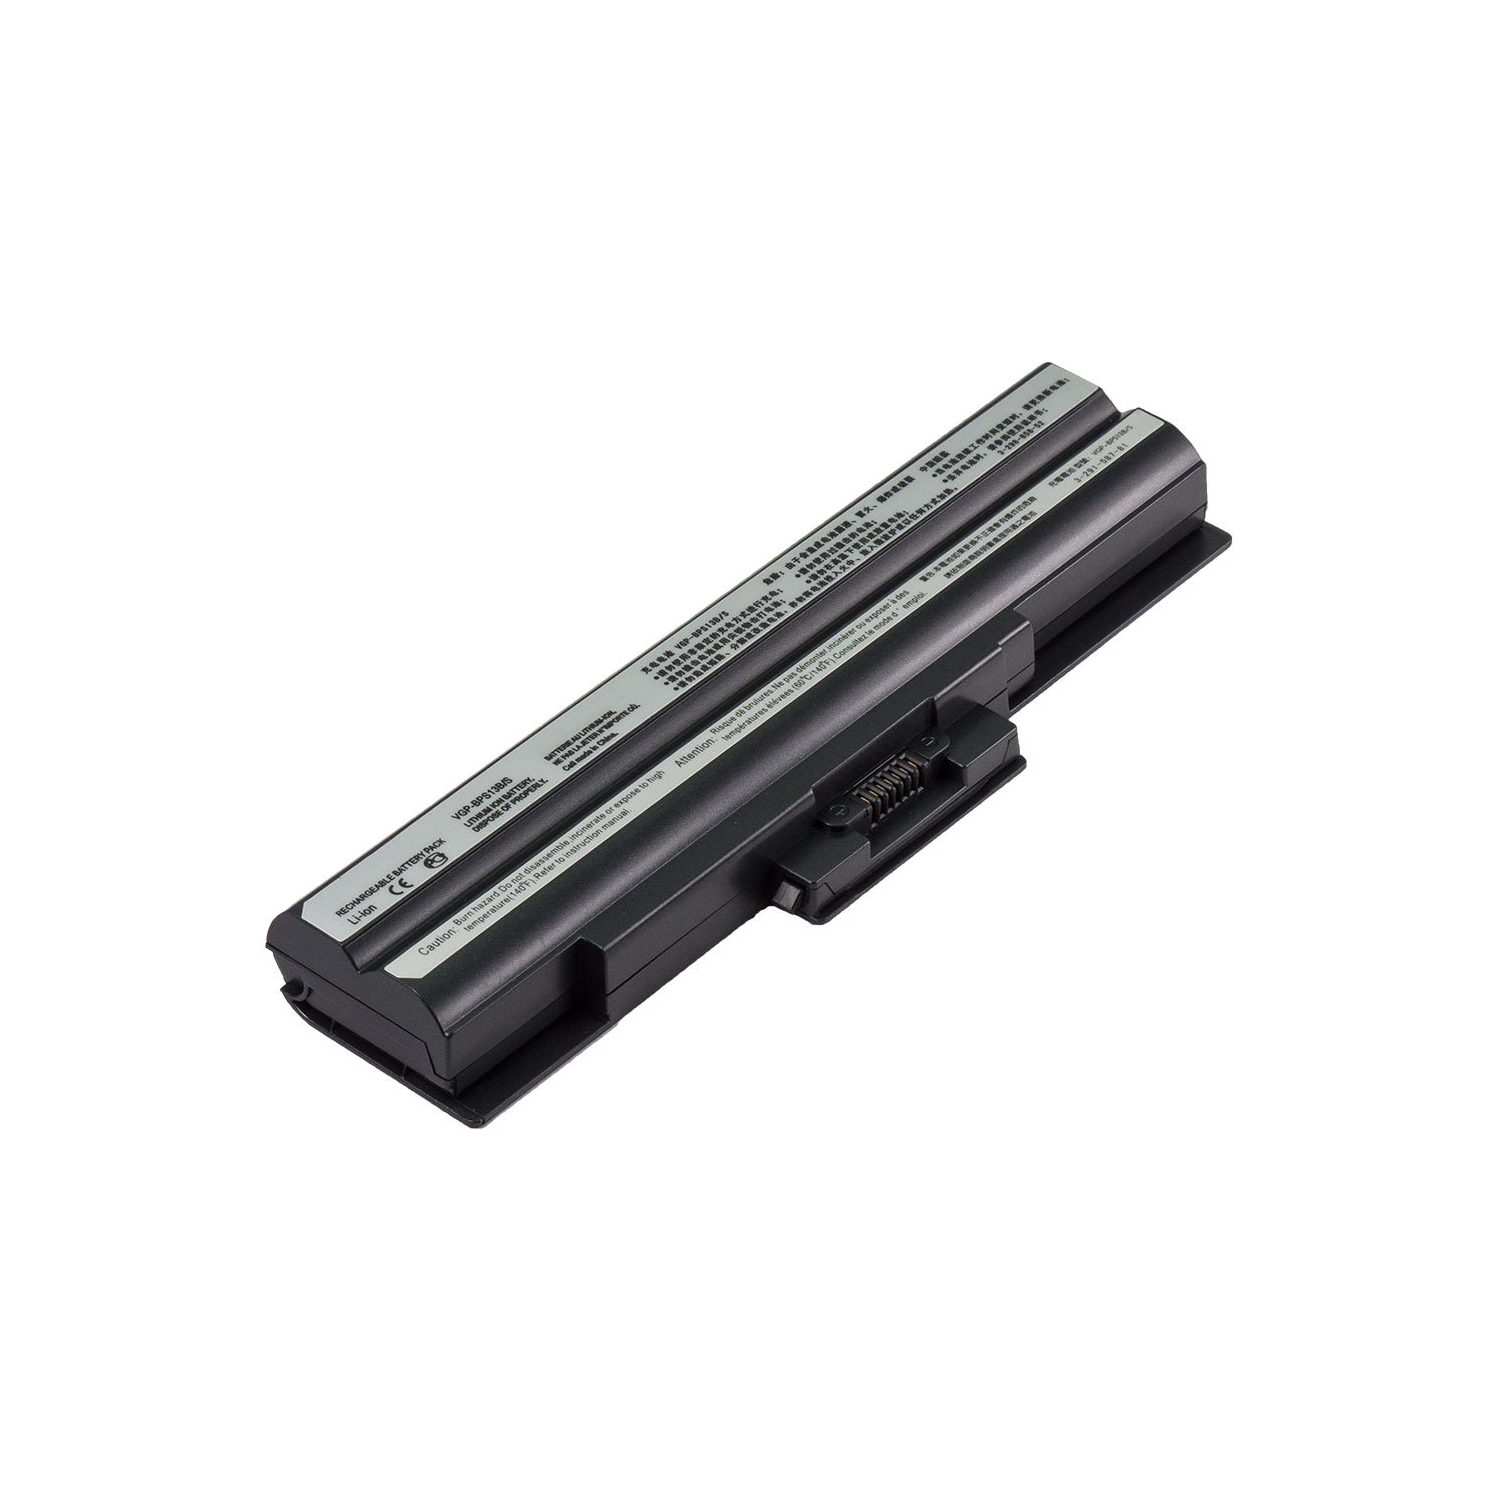 Laptop Battery Replacement for Sony VAIO VGN-NS135E, VGP-BPL13, VGP-BPS13/Q, VGP-BPS13A/B, VGP-BPS13A/S, VGP-BPS13A